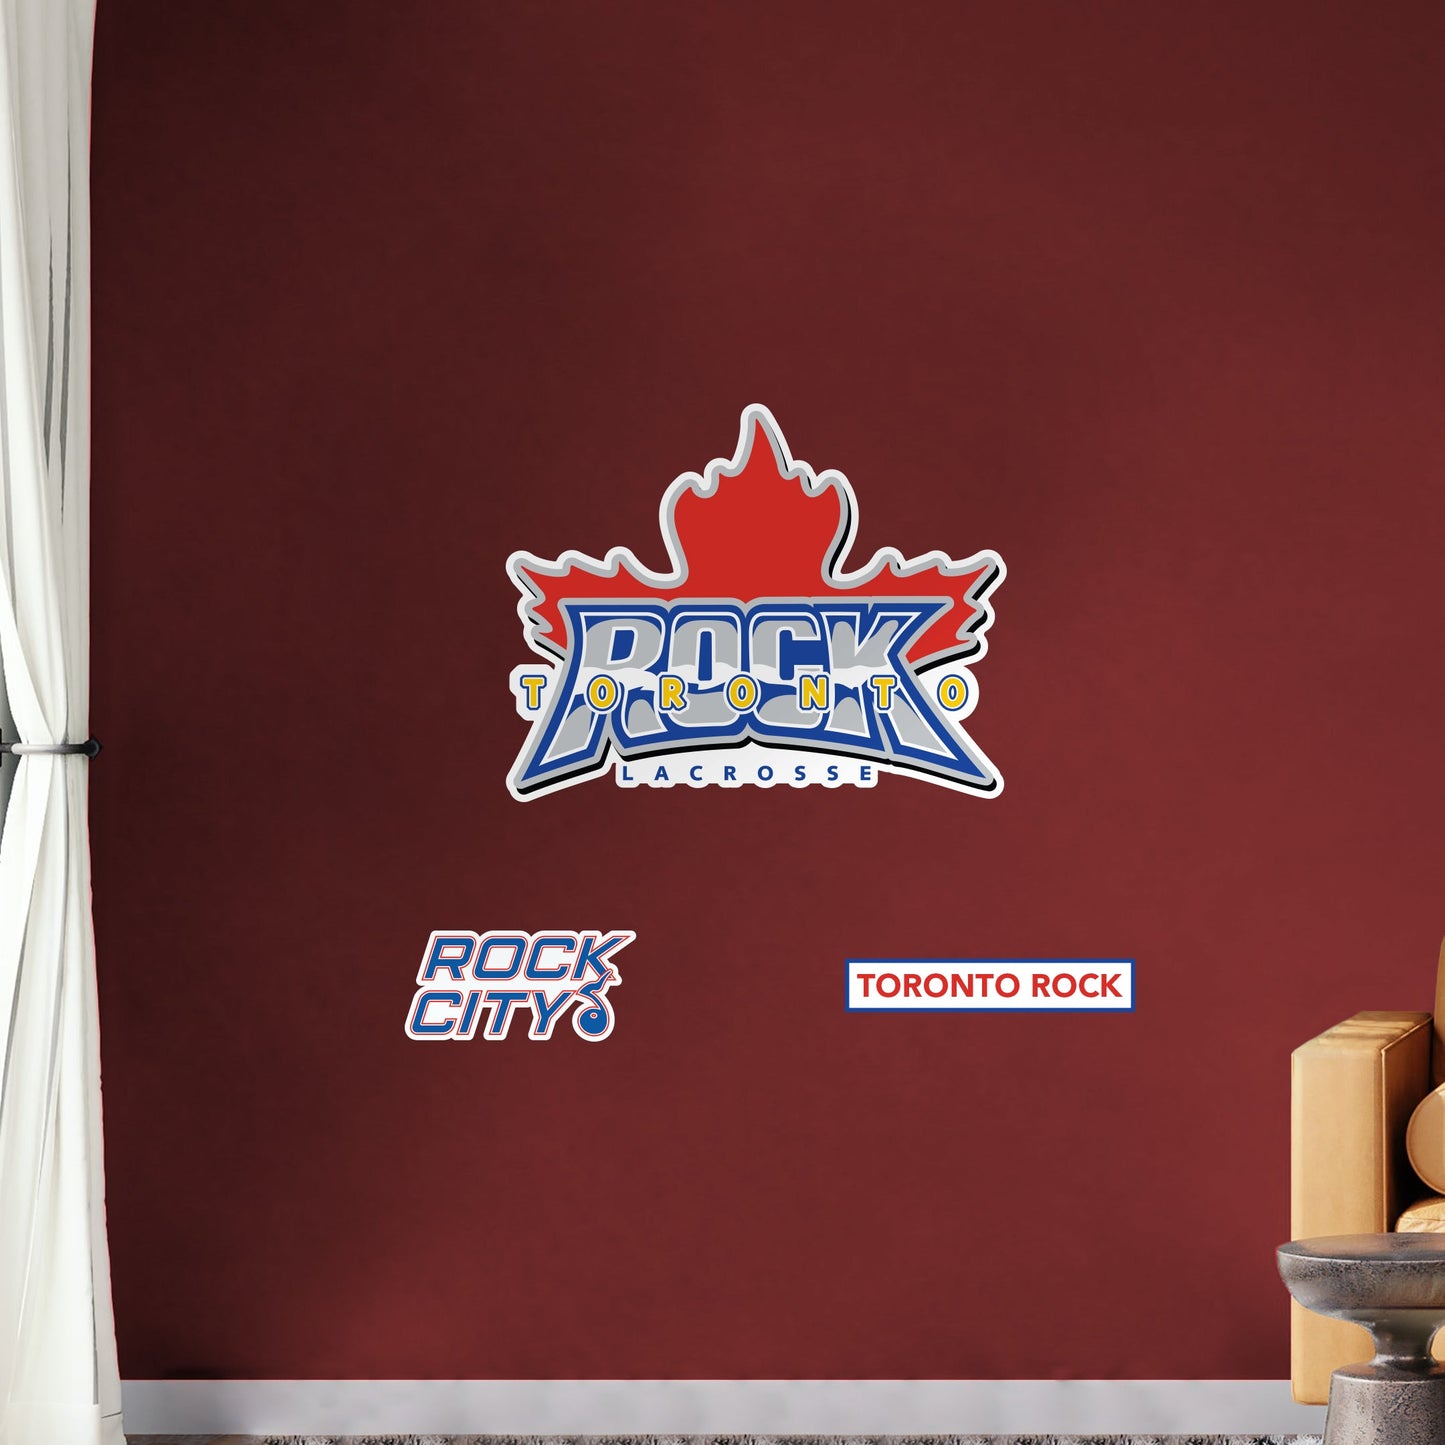 Toronto Rock:   Logo        - Officially Licensed NLL Removable     Adhesive Decal